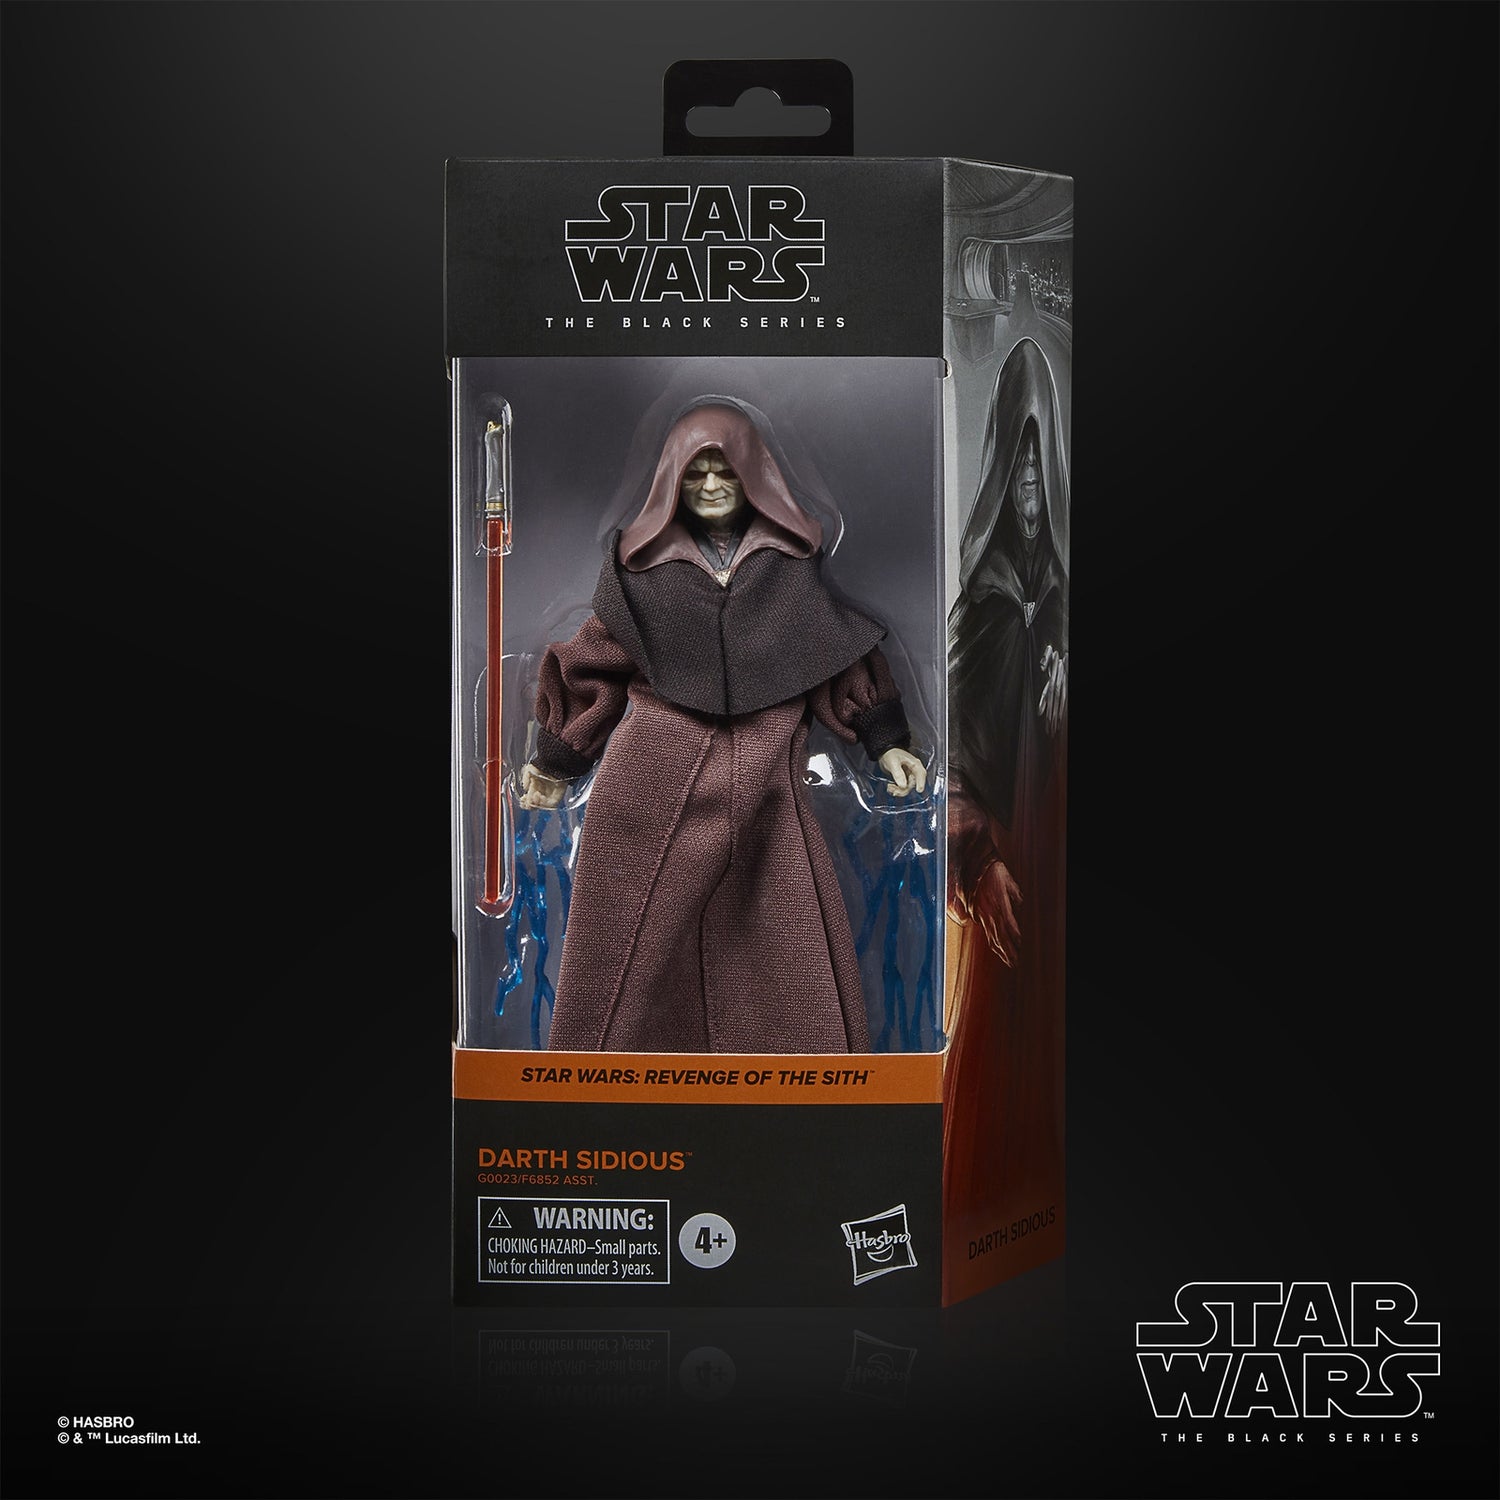 Star Wars The Black Series Darth Sidious, Star Wars: Revenge of the Sith Collectible 6 Inch Action Figure